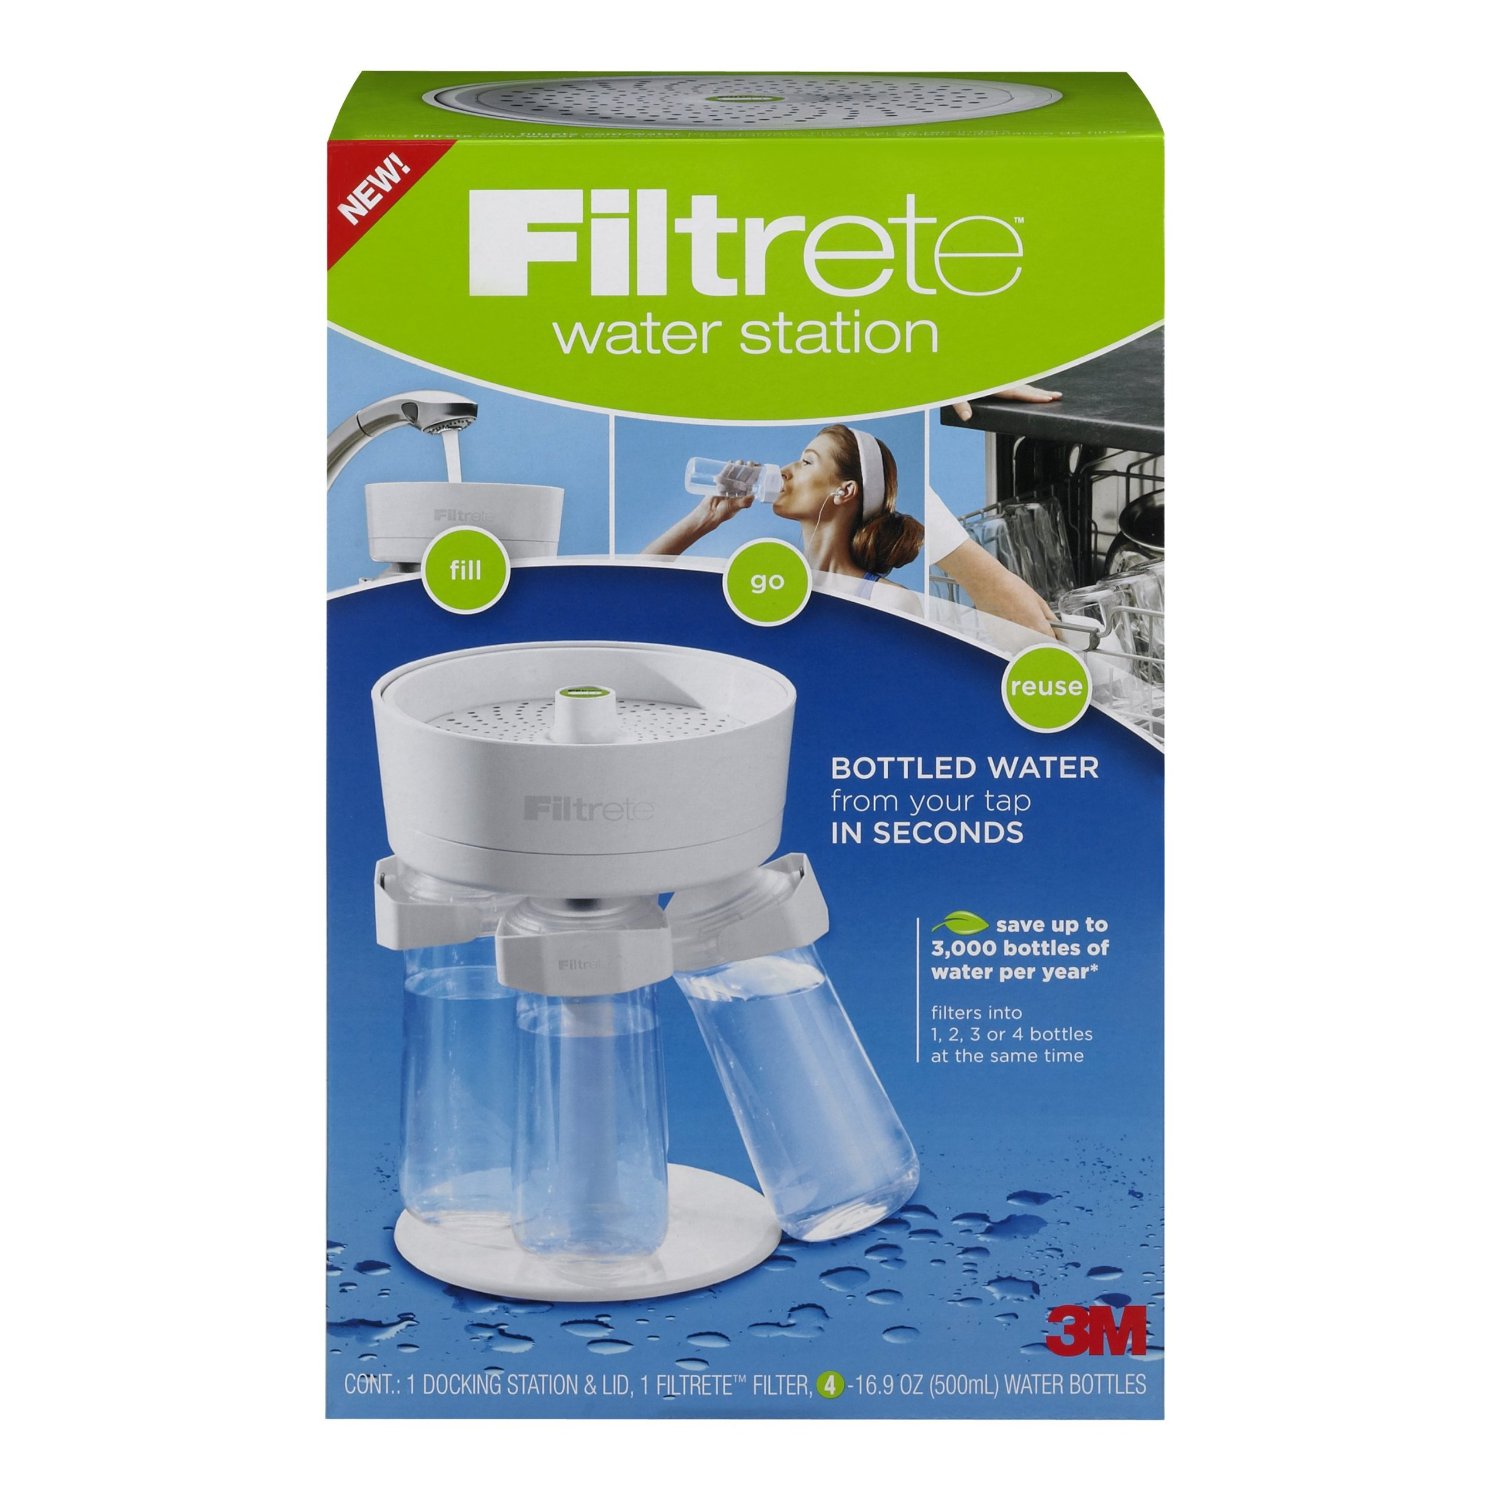 amazon-3m-filtrete-water-station-14-99-after-mail-in-rebate-southern-savers